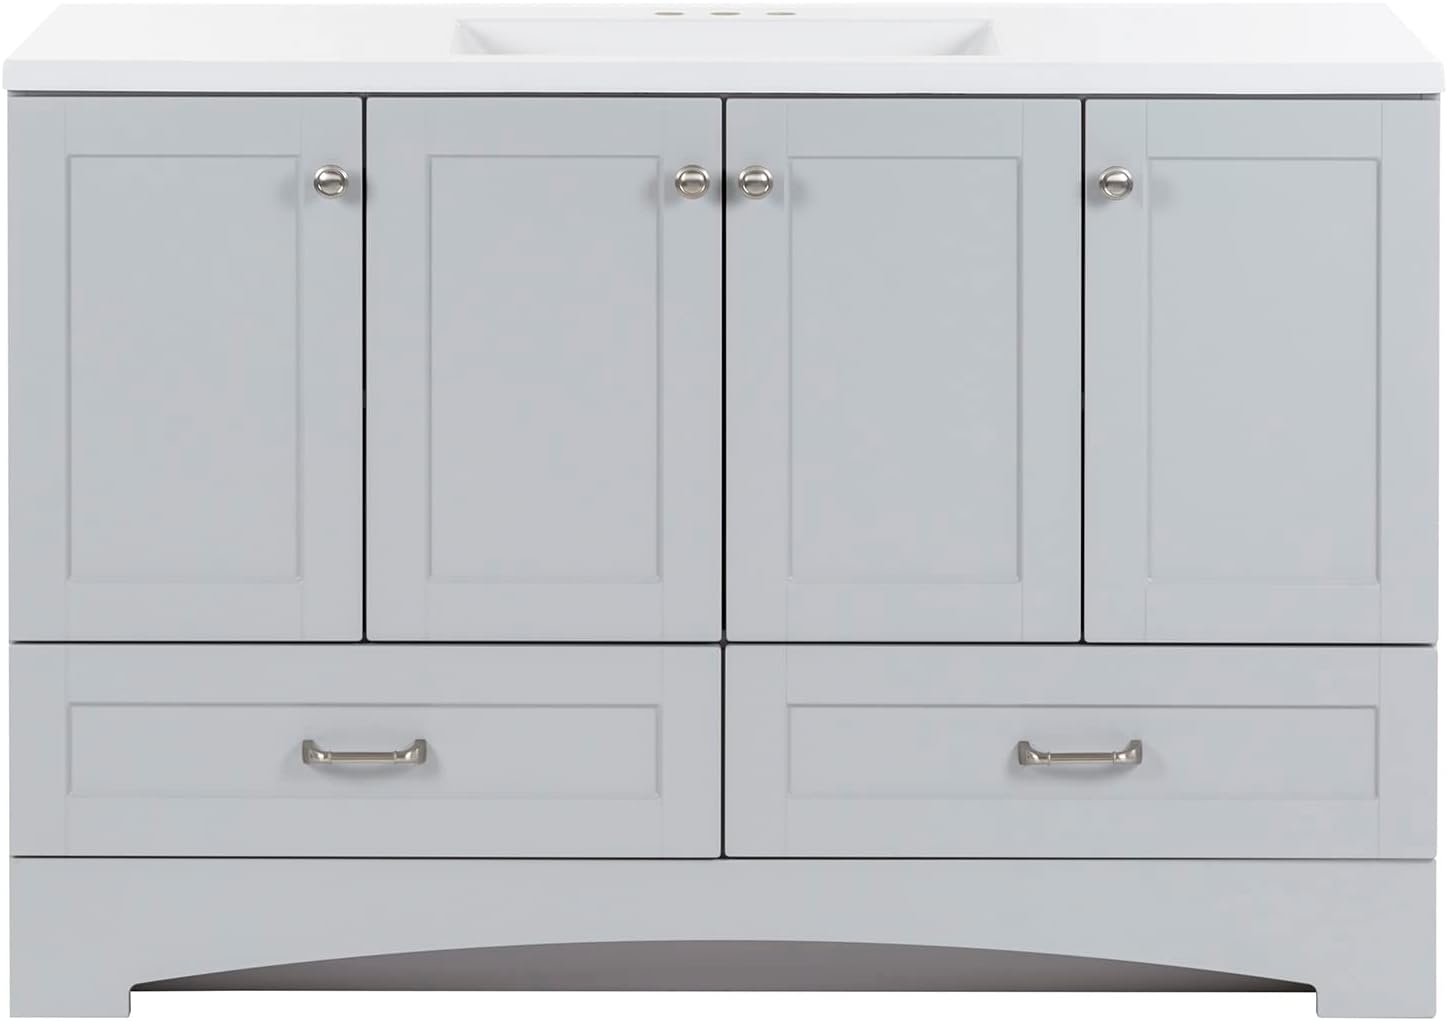 Spring Mill Cabinets Emlyn Bathroom Vanity with 3 Cabinets, 2 Shelves, 2 Drawers, and White Sink Top, 48.5 W x 18.75 D x 32.89 H, Pearl Gray